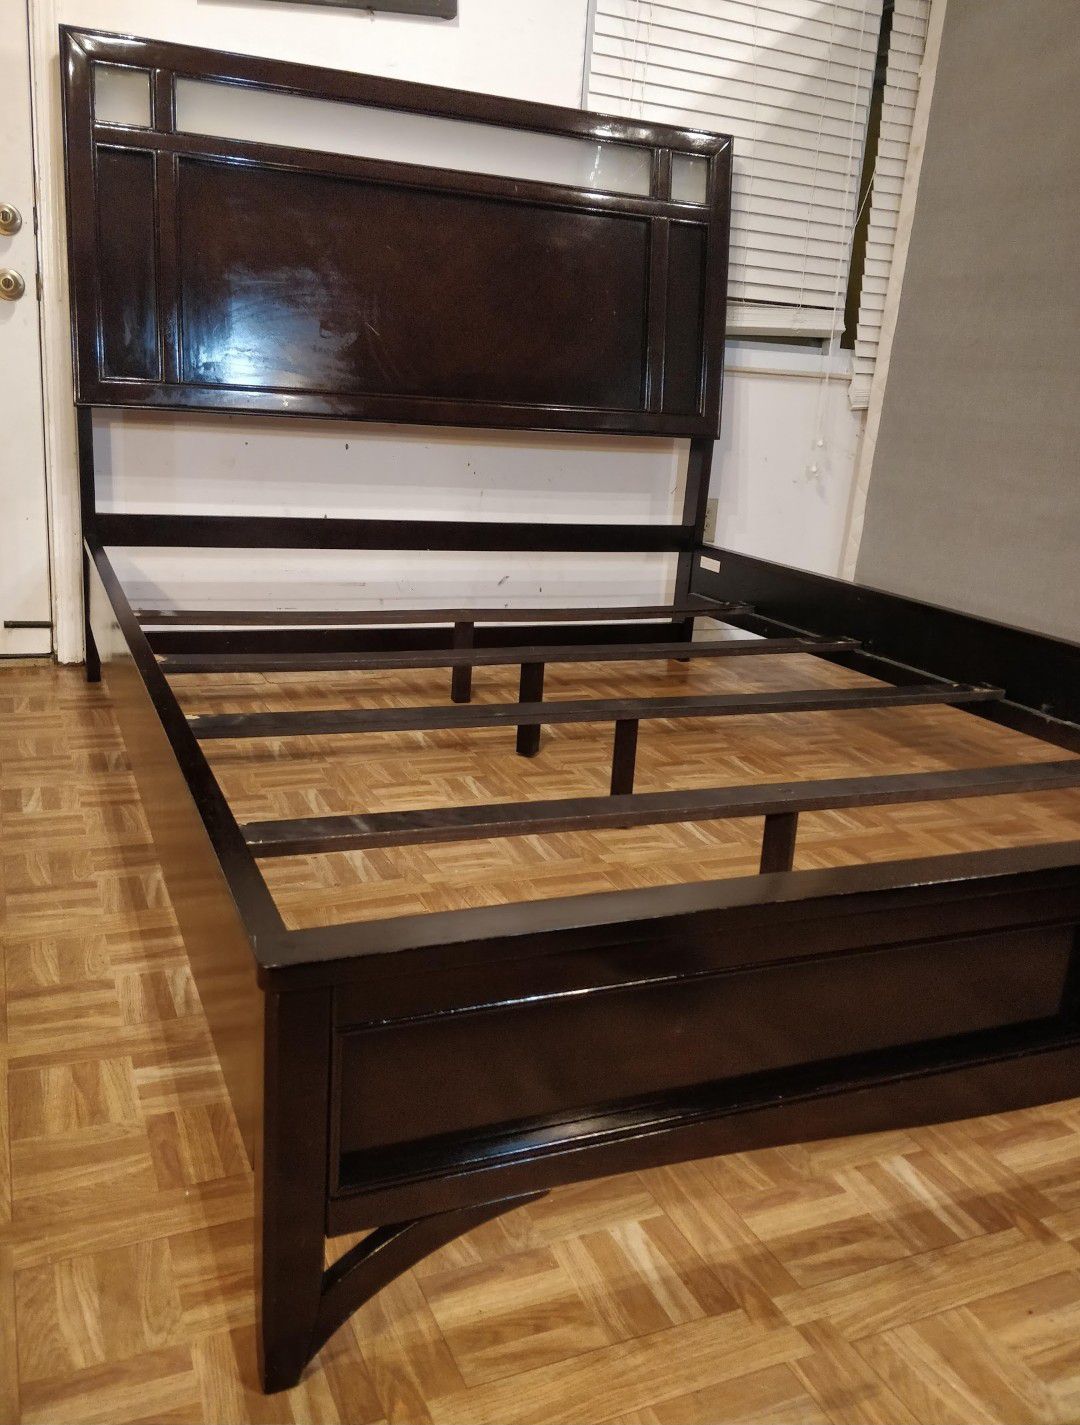 Nice modern wooden Queen bed frame in good condition.